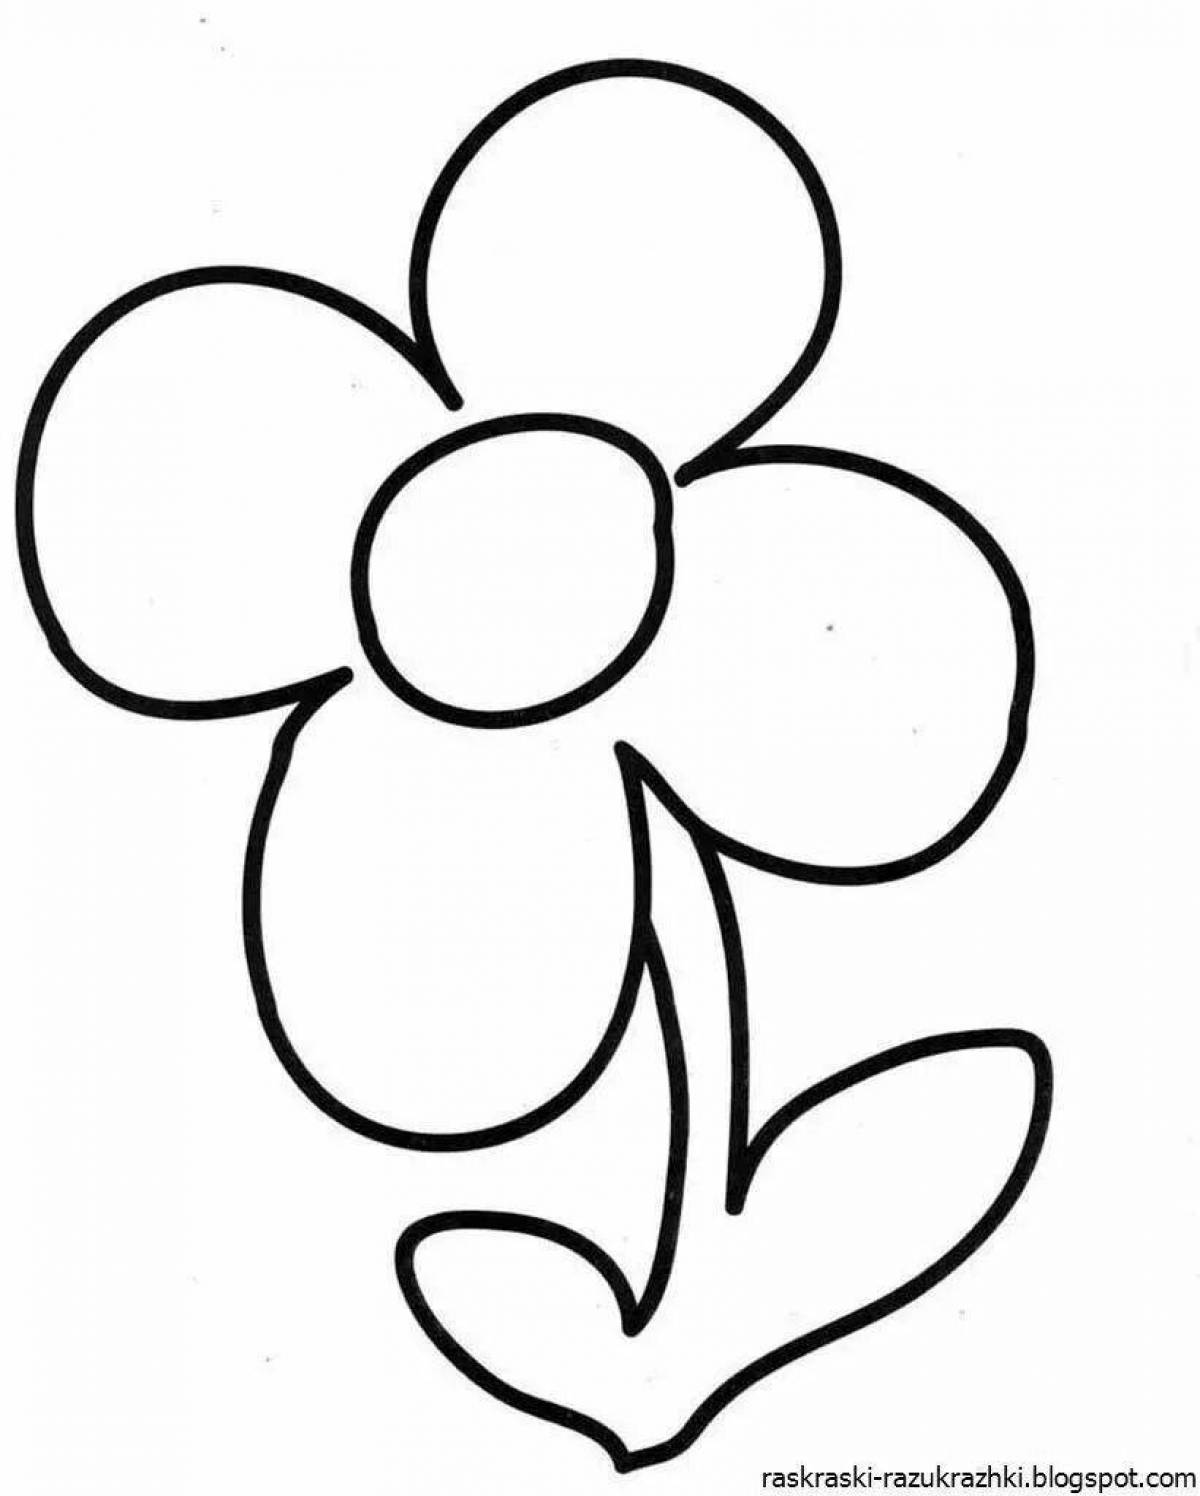 Exquisite flower coloring book for 4-5 year olds